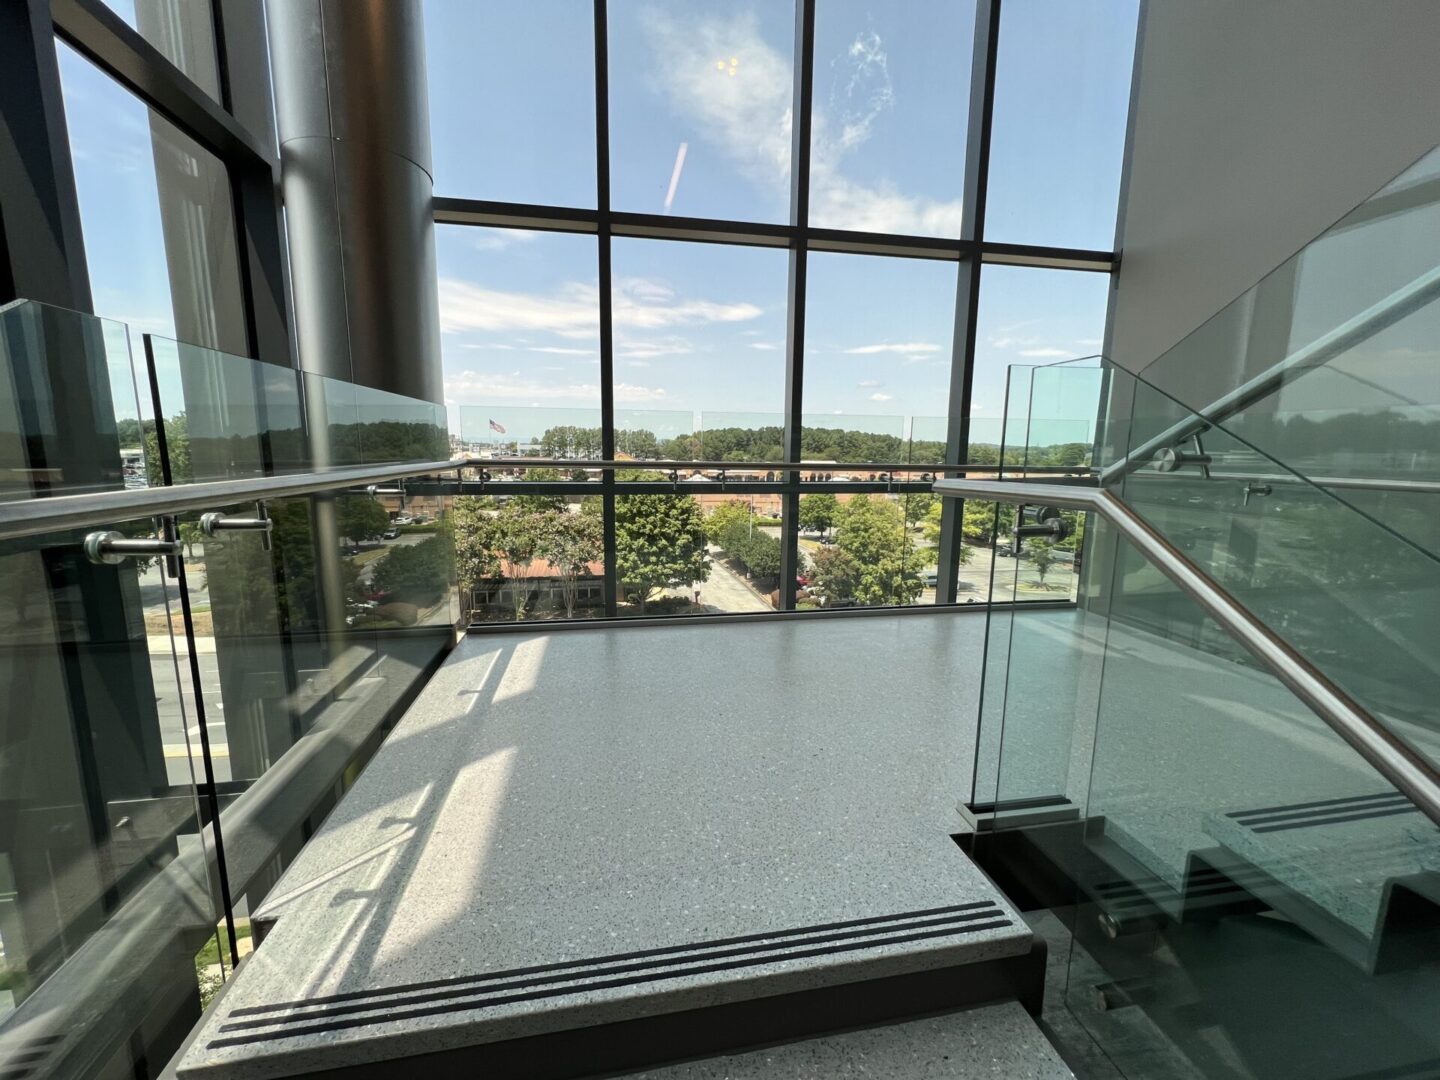 A Glass Wall For a Building in a Metal Frame